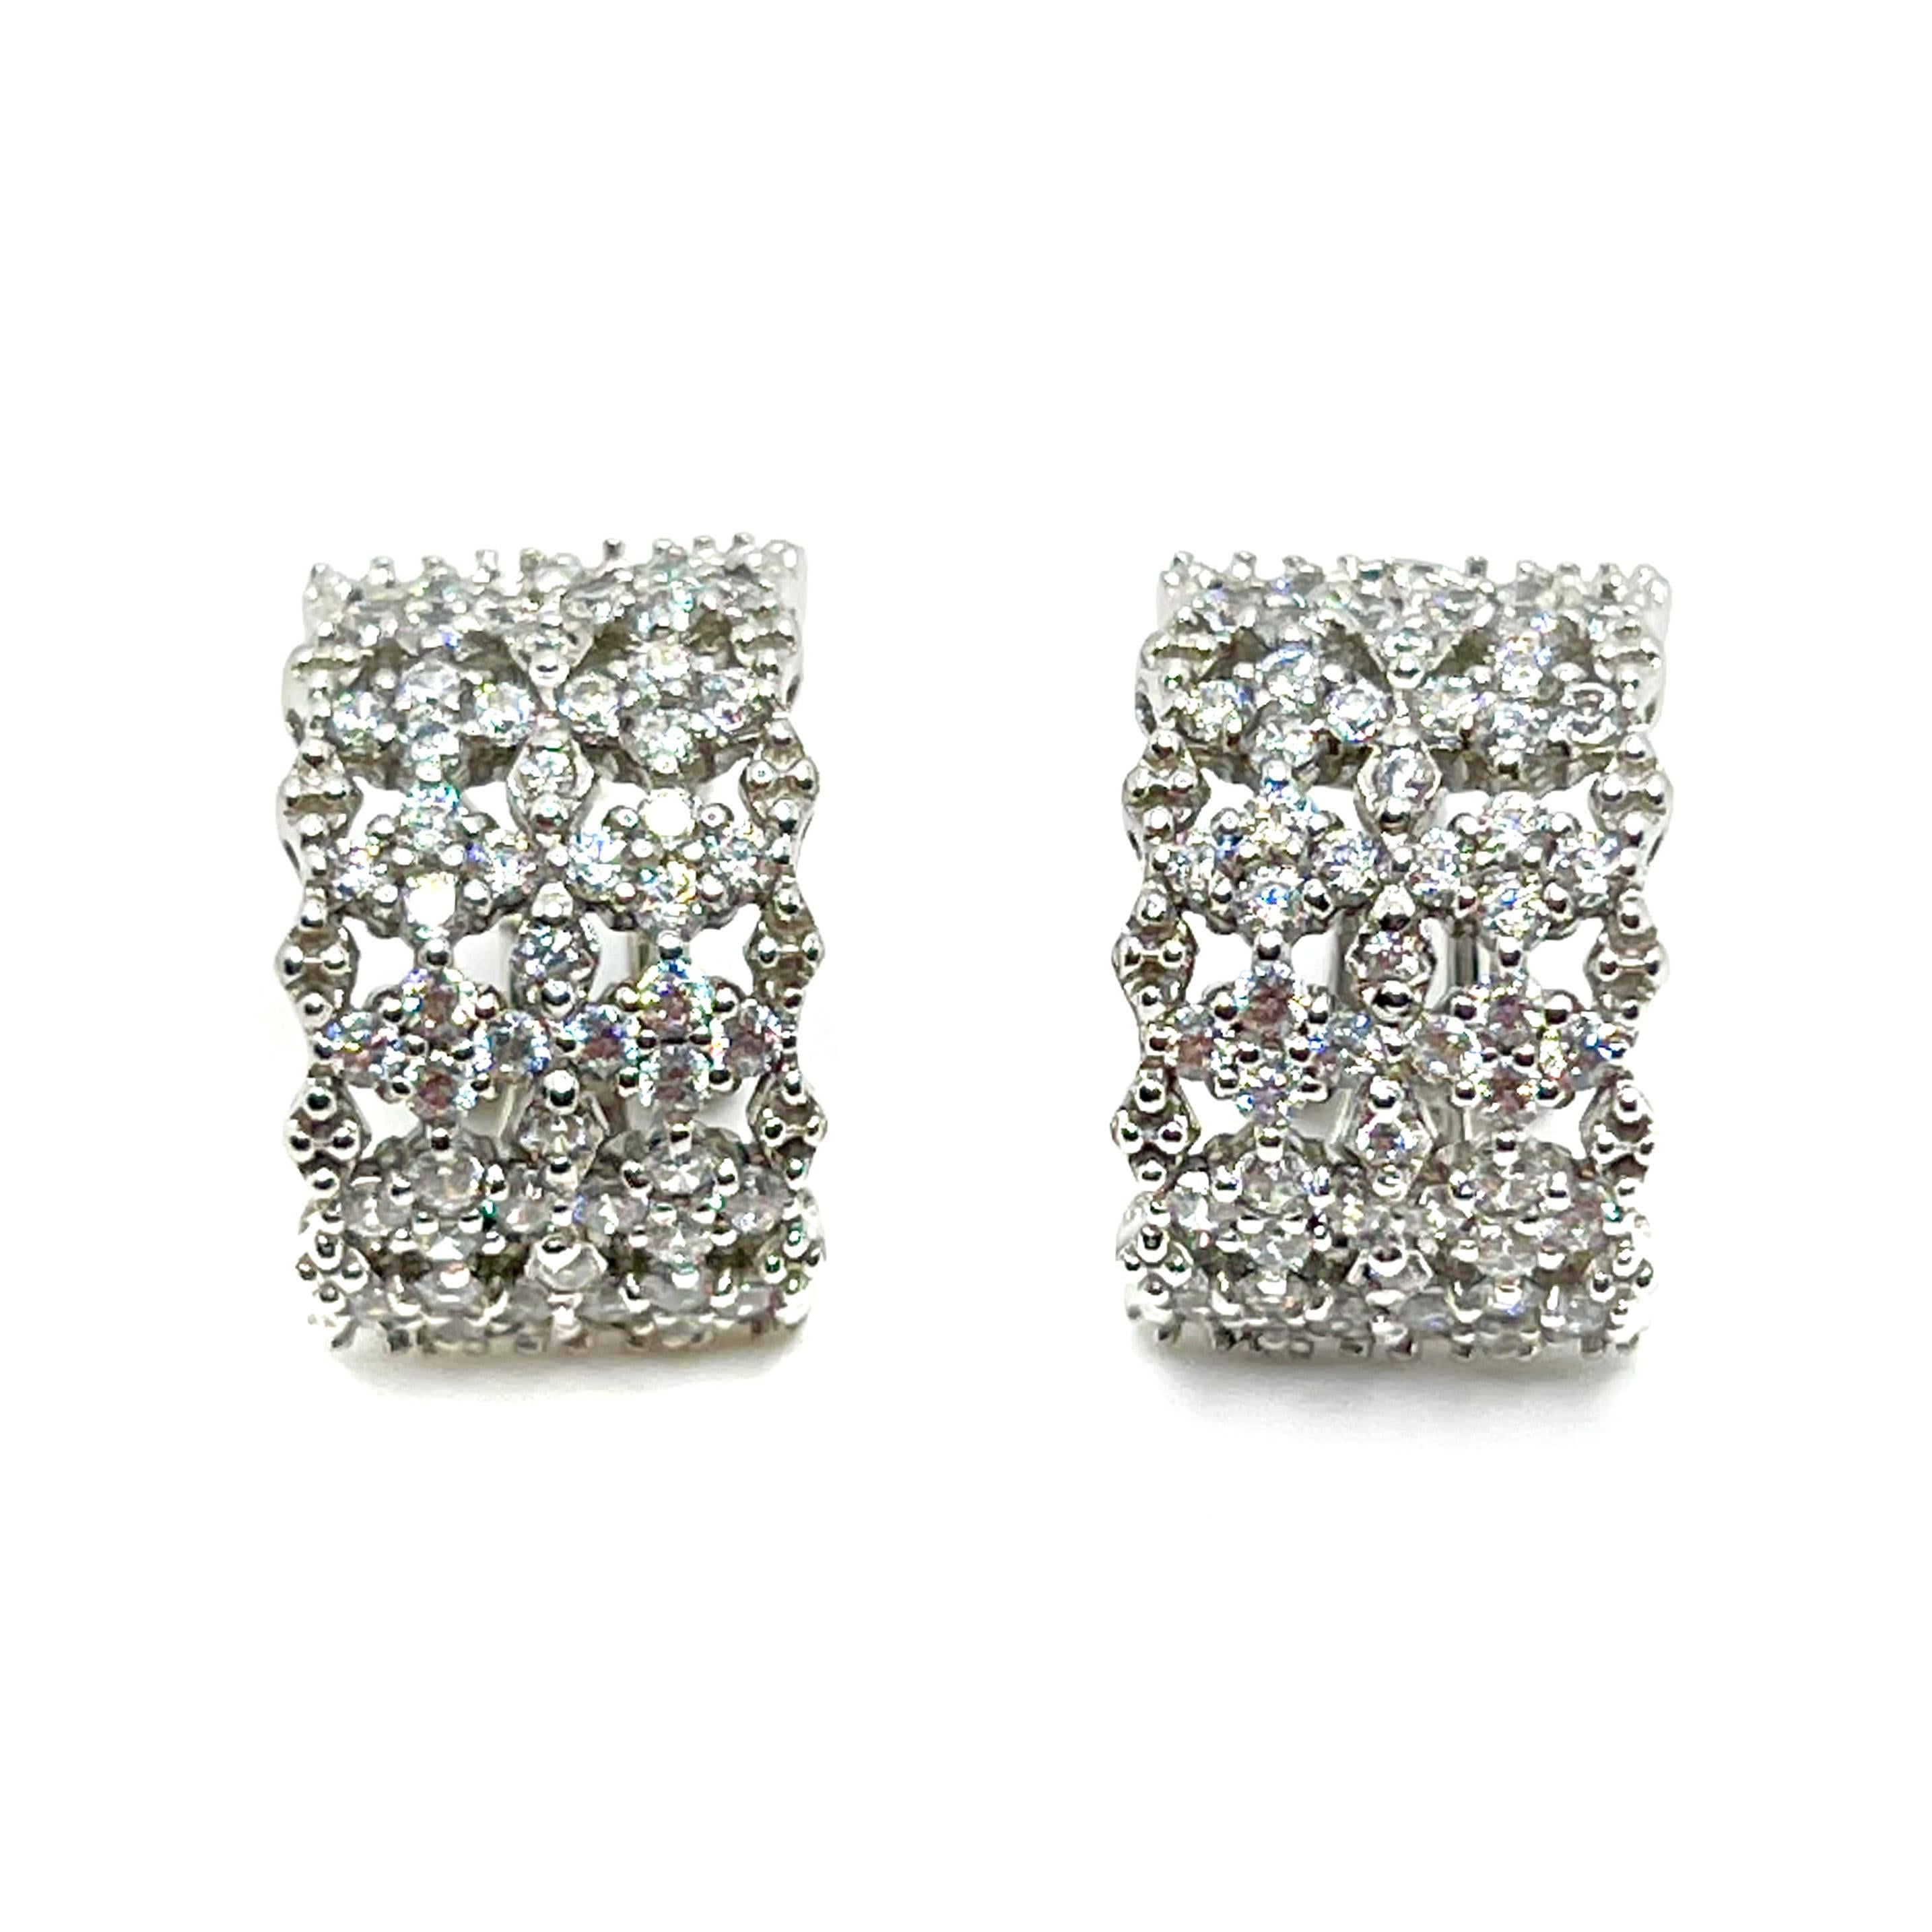 Stunning Bijoux Num Diamond-Pattern Half Hoop Sterling Silver Earrings

These fabulous earrings feature 108pcs of round simulated diamonds (AAA quality) handset in platinum rhodium plated sterling silver, small accent beads around the edge, and